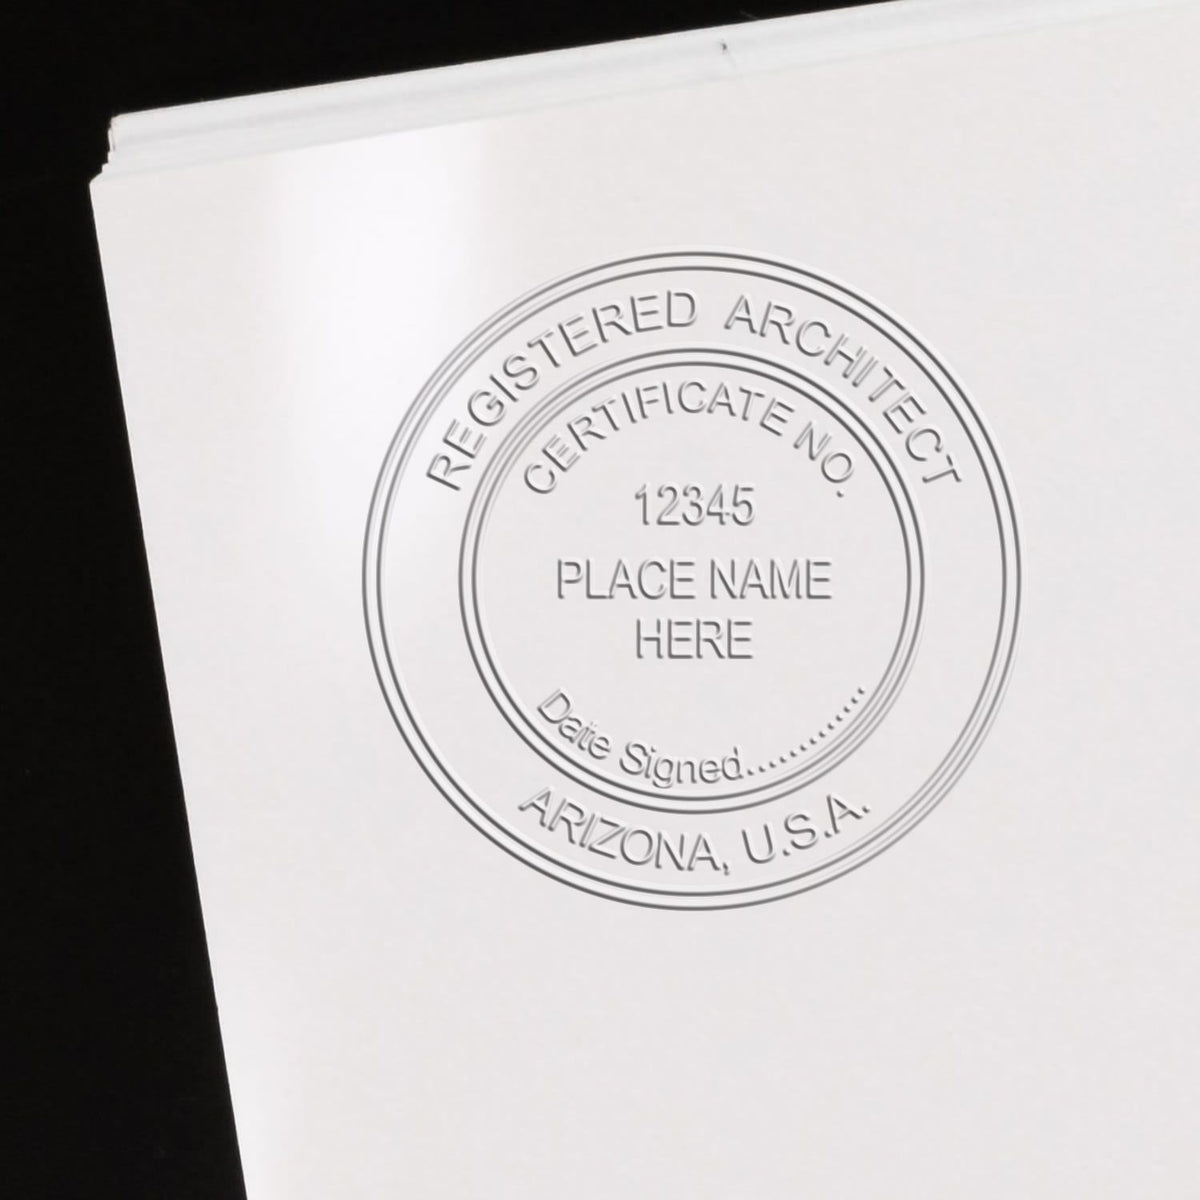 A stamped impression of the Arizona Desk Architect Embossing Seal in this stylish lifestyle photo, setting the tone for a unique and personalized product.